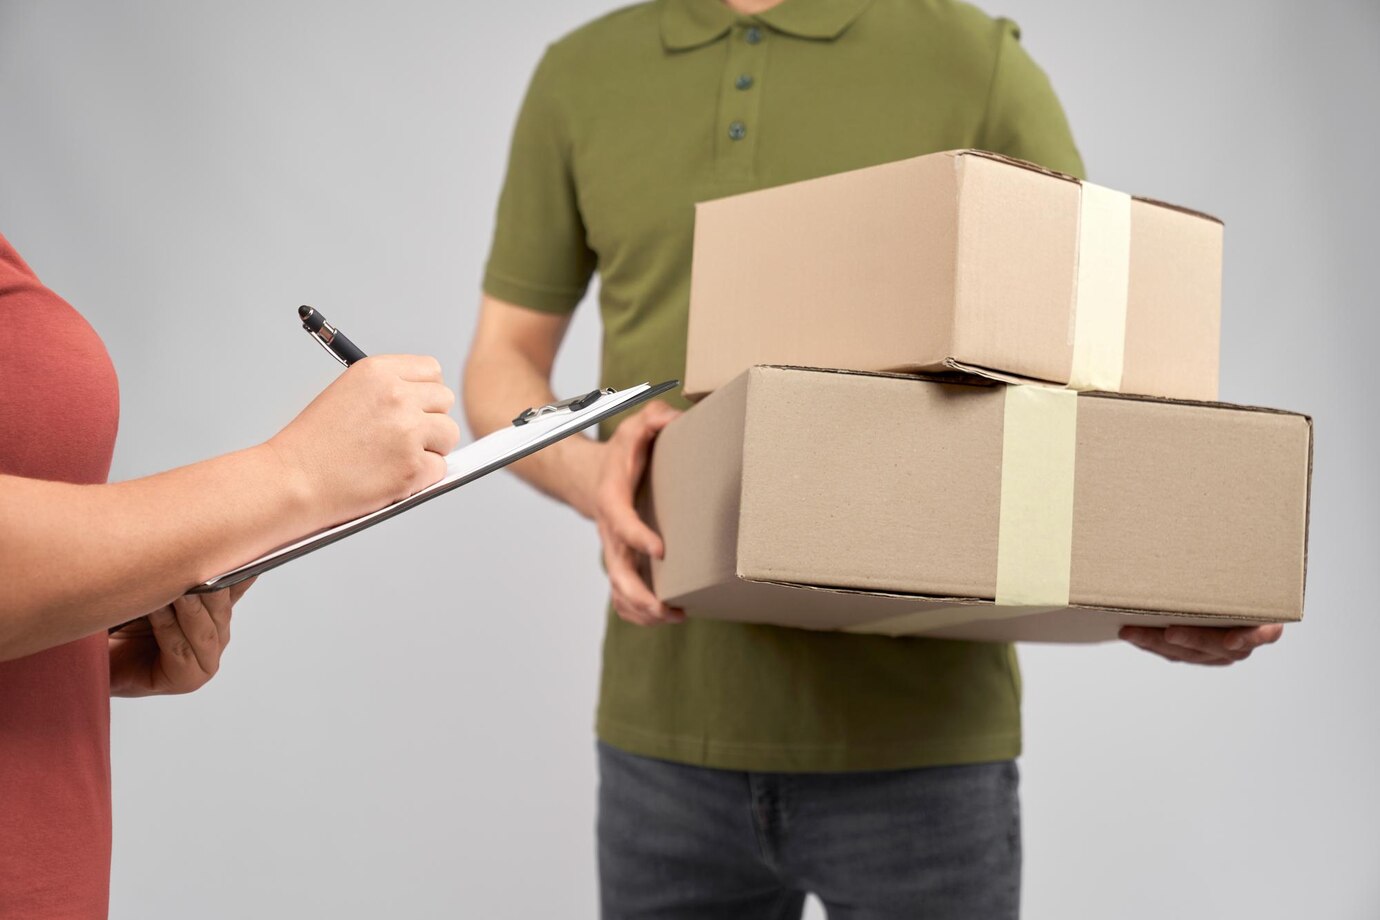 delivery-man-holding-two-boxes-client-signing-receipt_651396-982